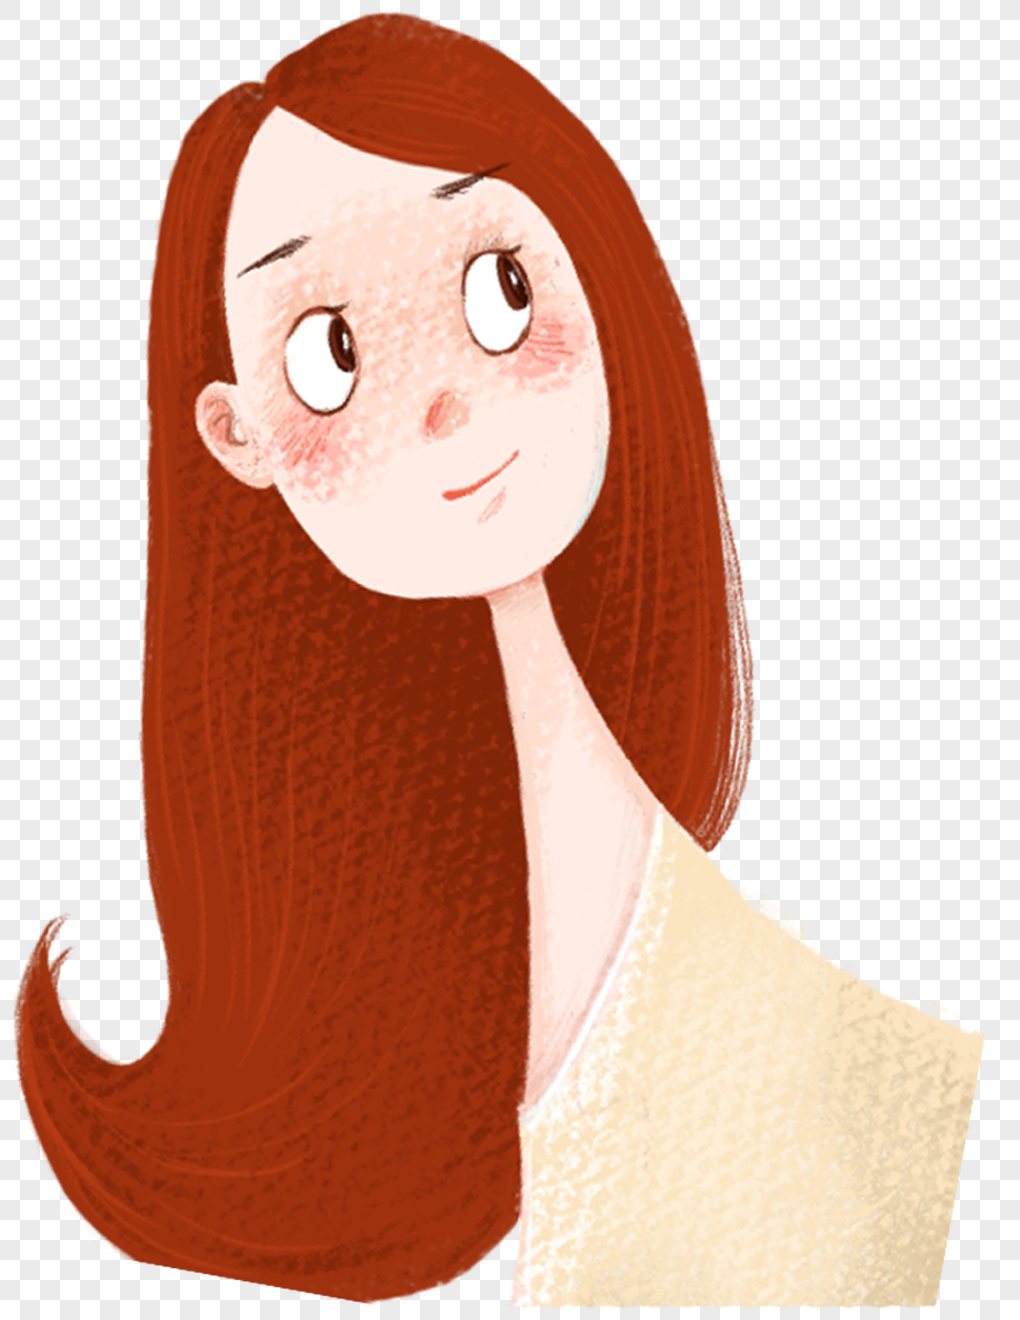 ginger hair clipart png